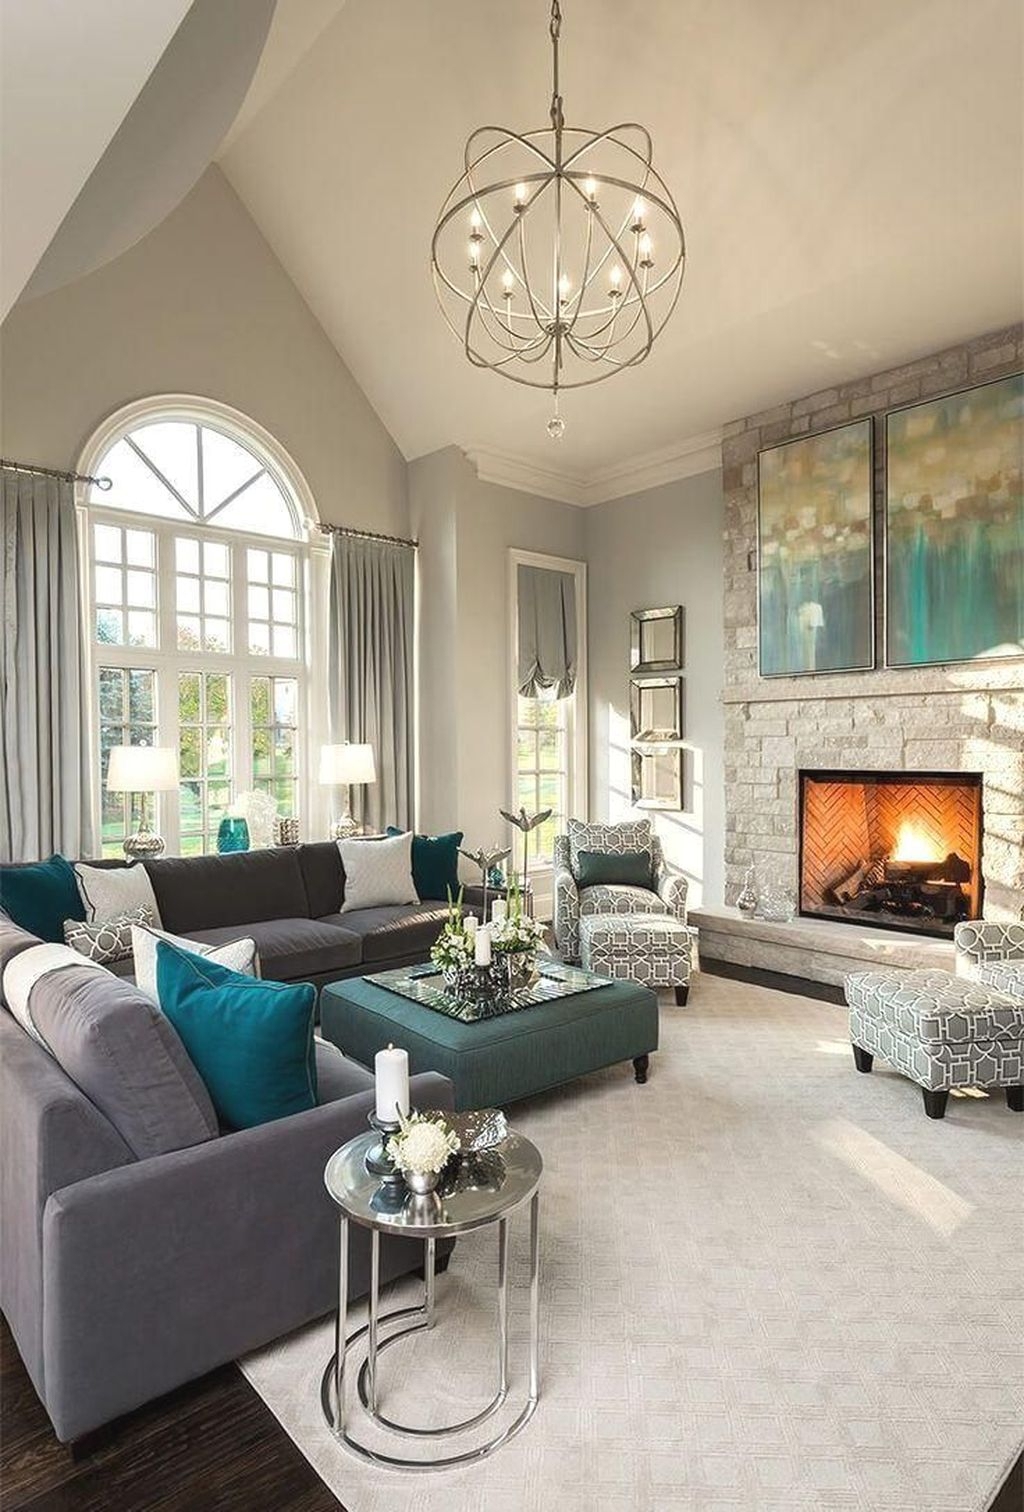 Home Decor Living Room Ideas: Add Style And Comfort To Your Space